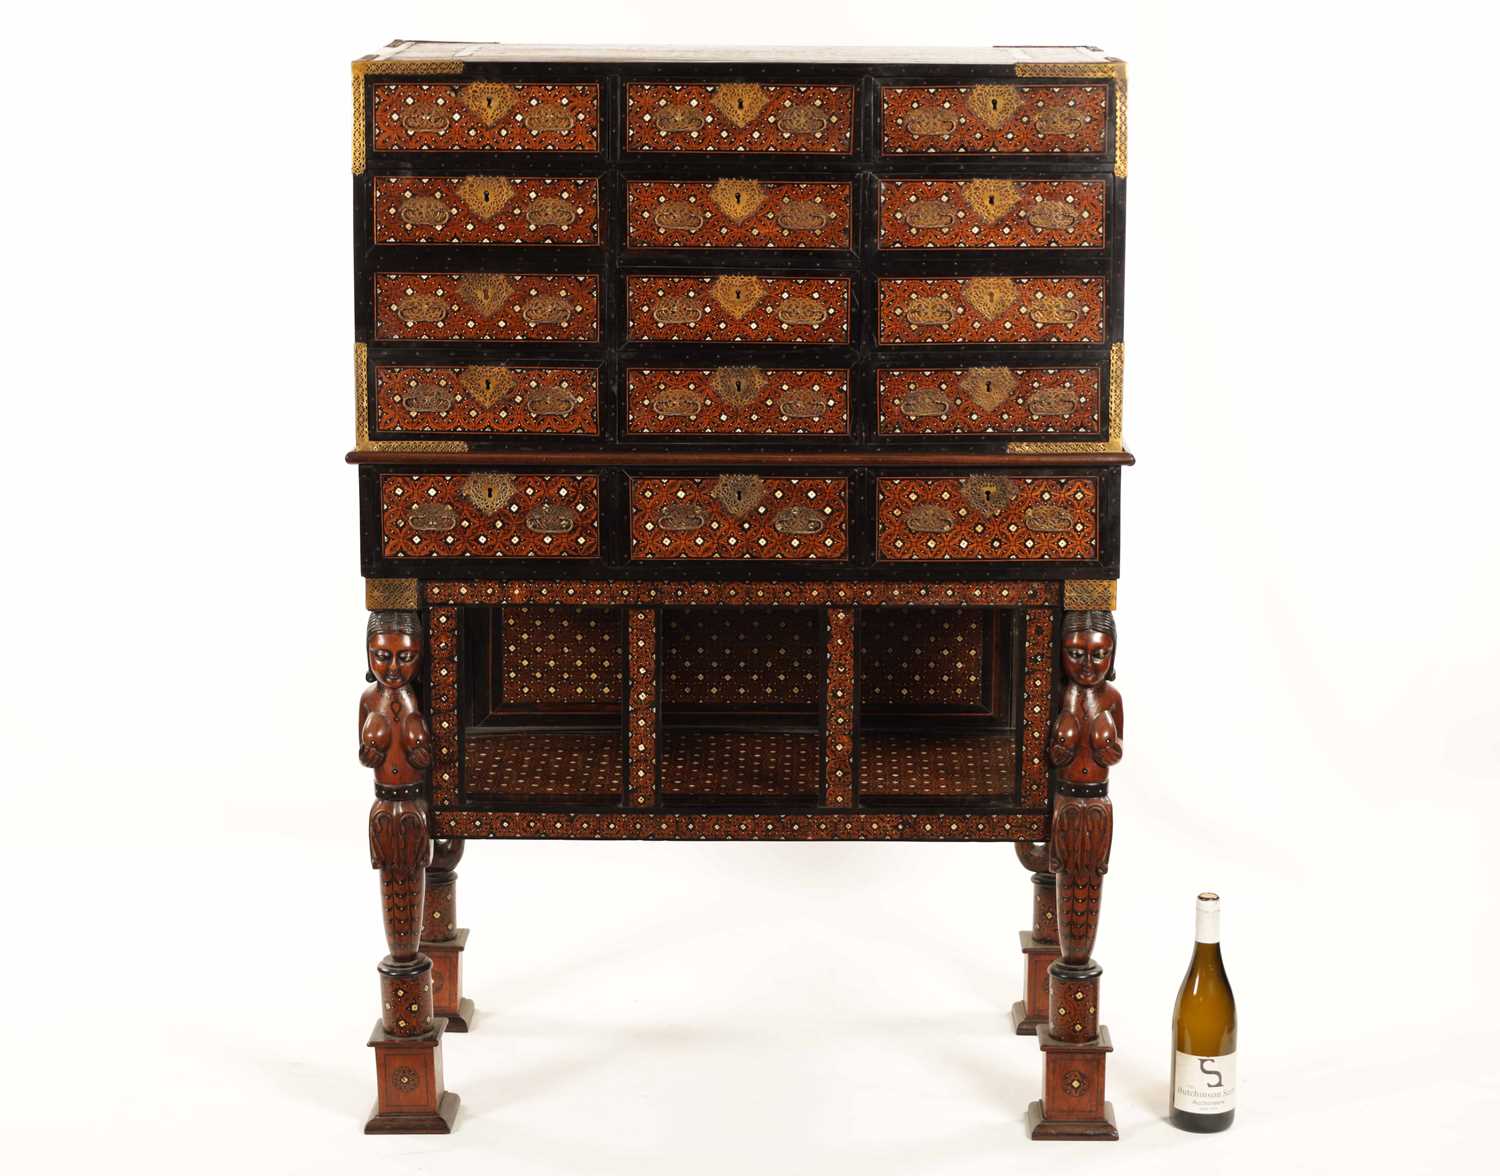 AN IMPORTANT LATE 17TH CENTURY INDO-PORTUGUESE IVORY INLAID PADOUCK AND EBONY COLLECTORS CABINET ON - Image 2 of 16